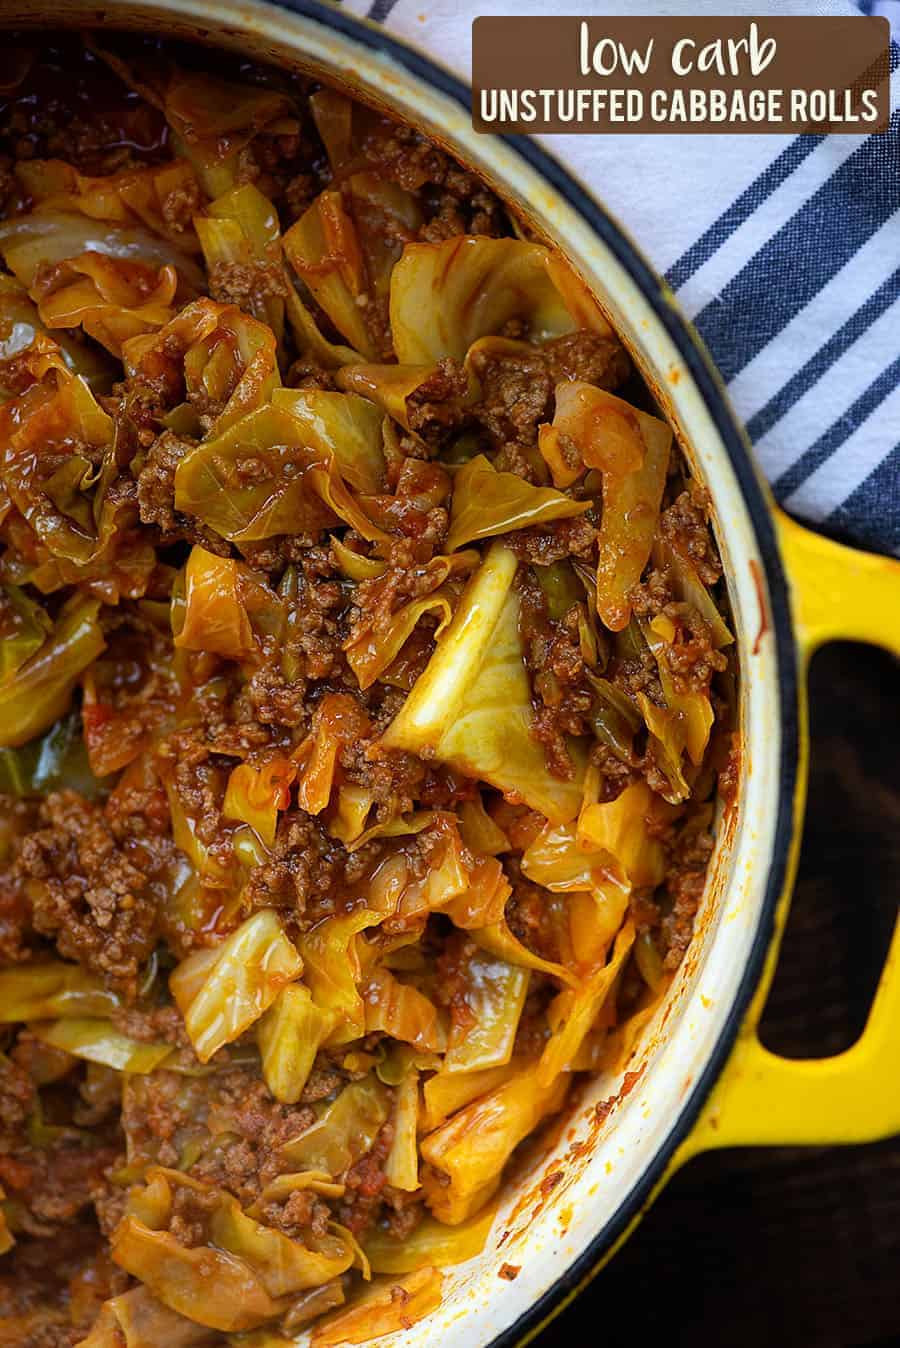 cooked unstuffed cabbage rolls in a large yellow pot